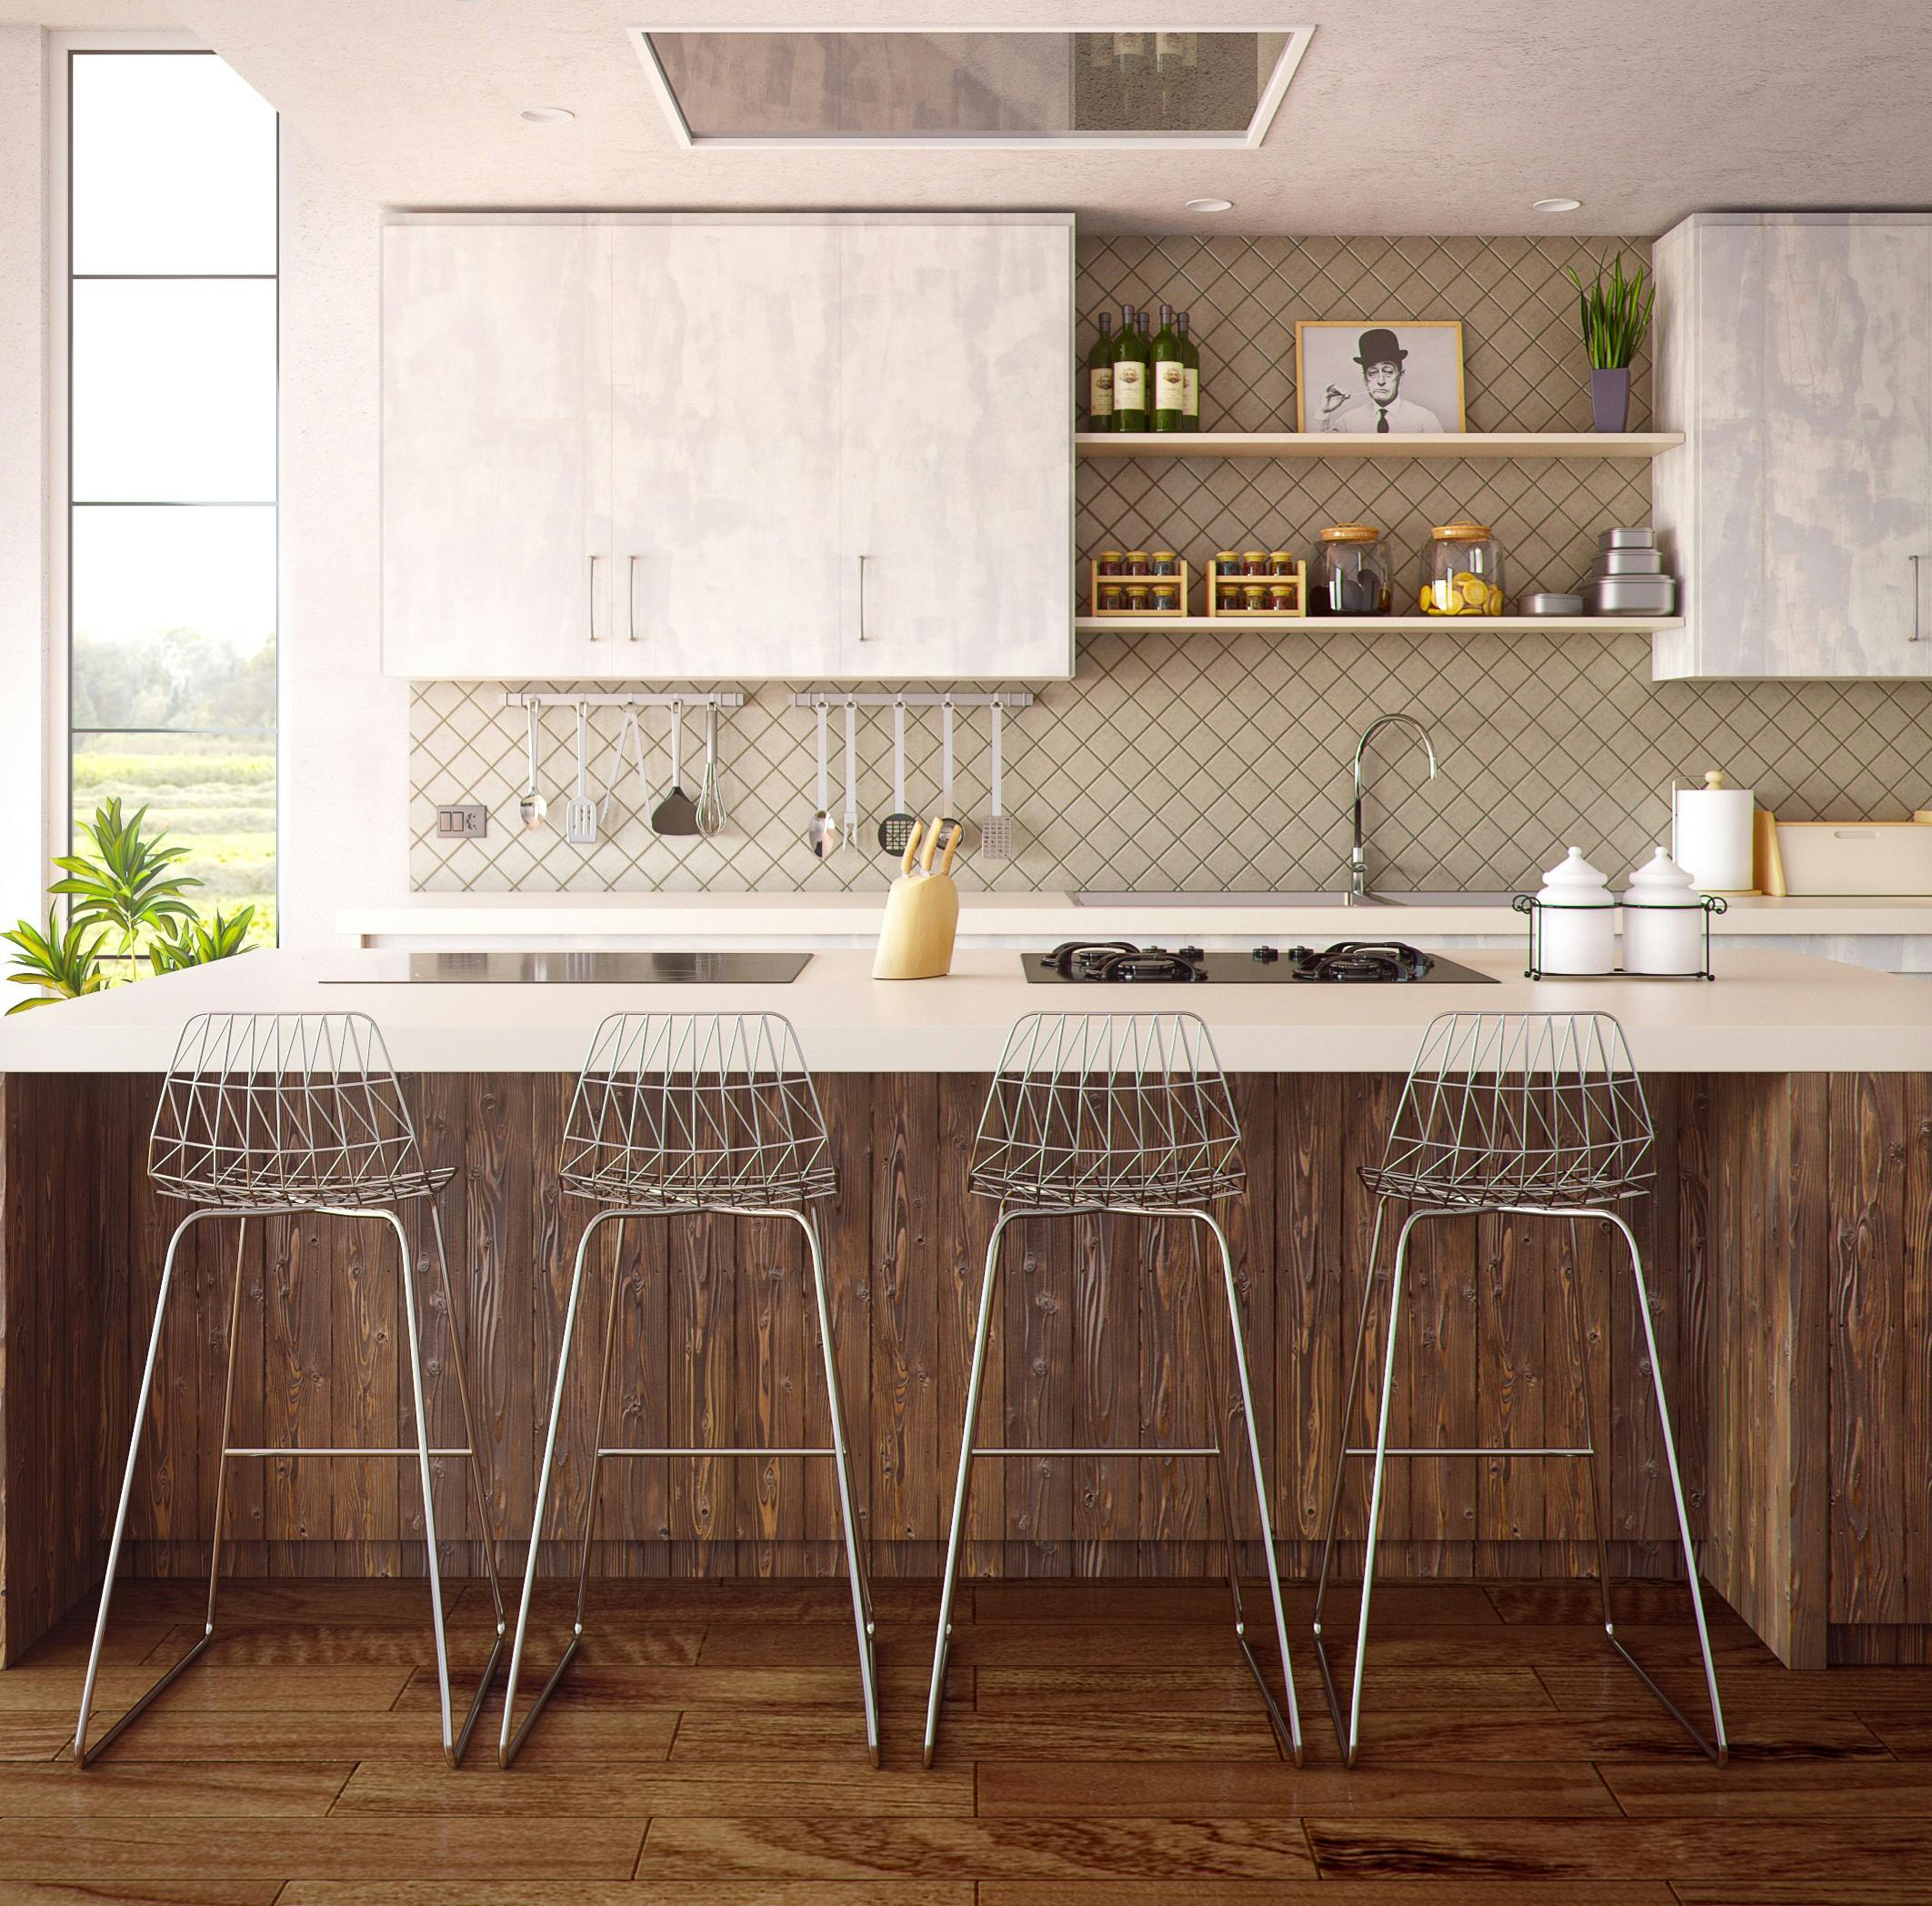 four grey bar stools in front of kitchen countertop